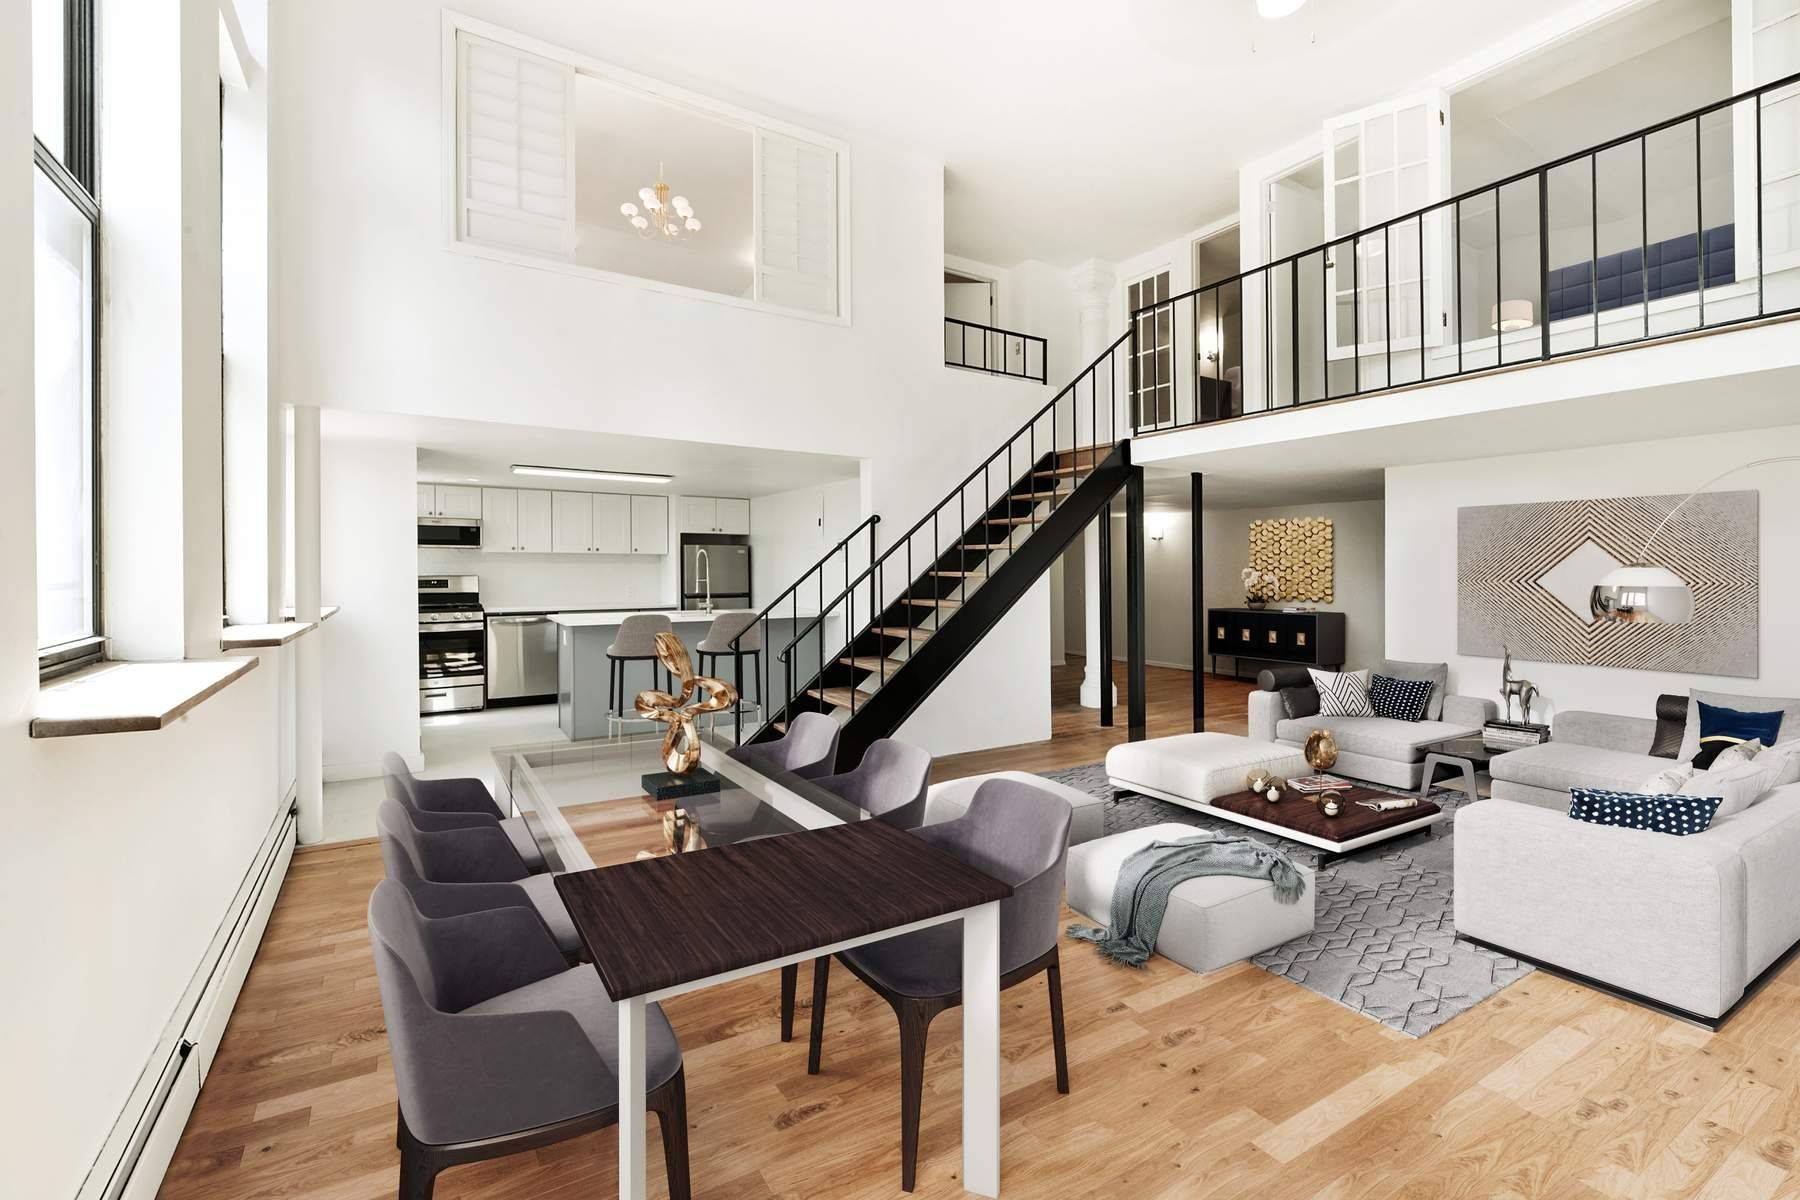 This Sun Drenched Duplex Loft at the Magnolia Mansion Lofts offers 14 ft.